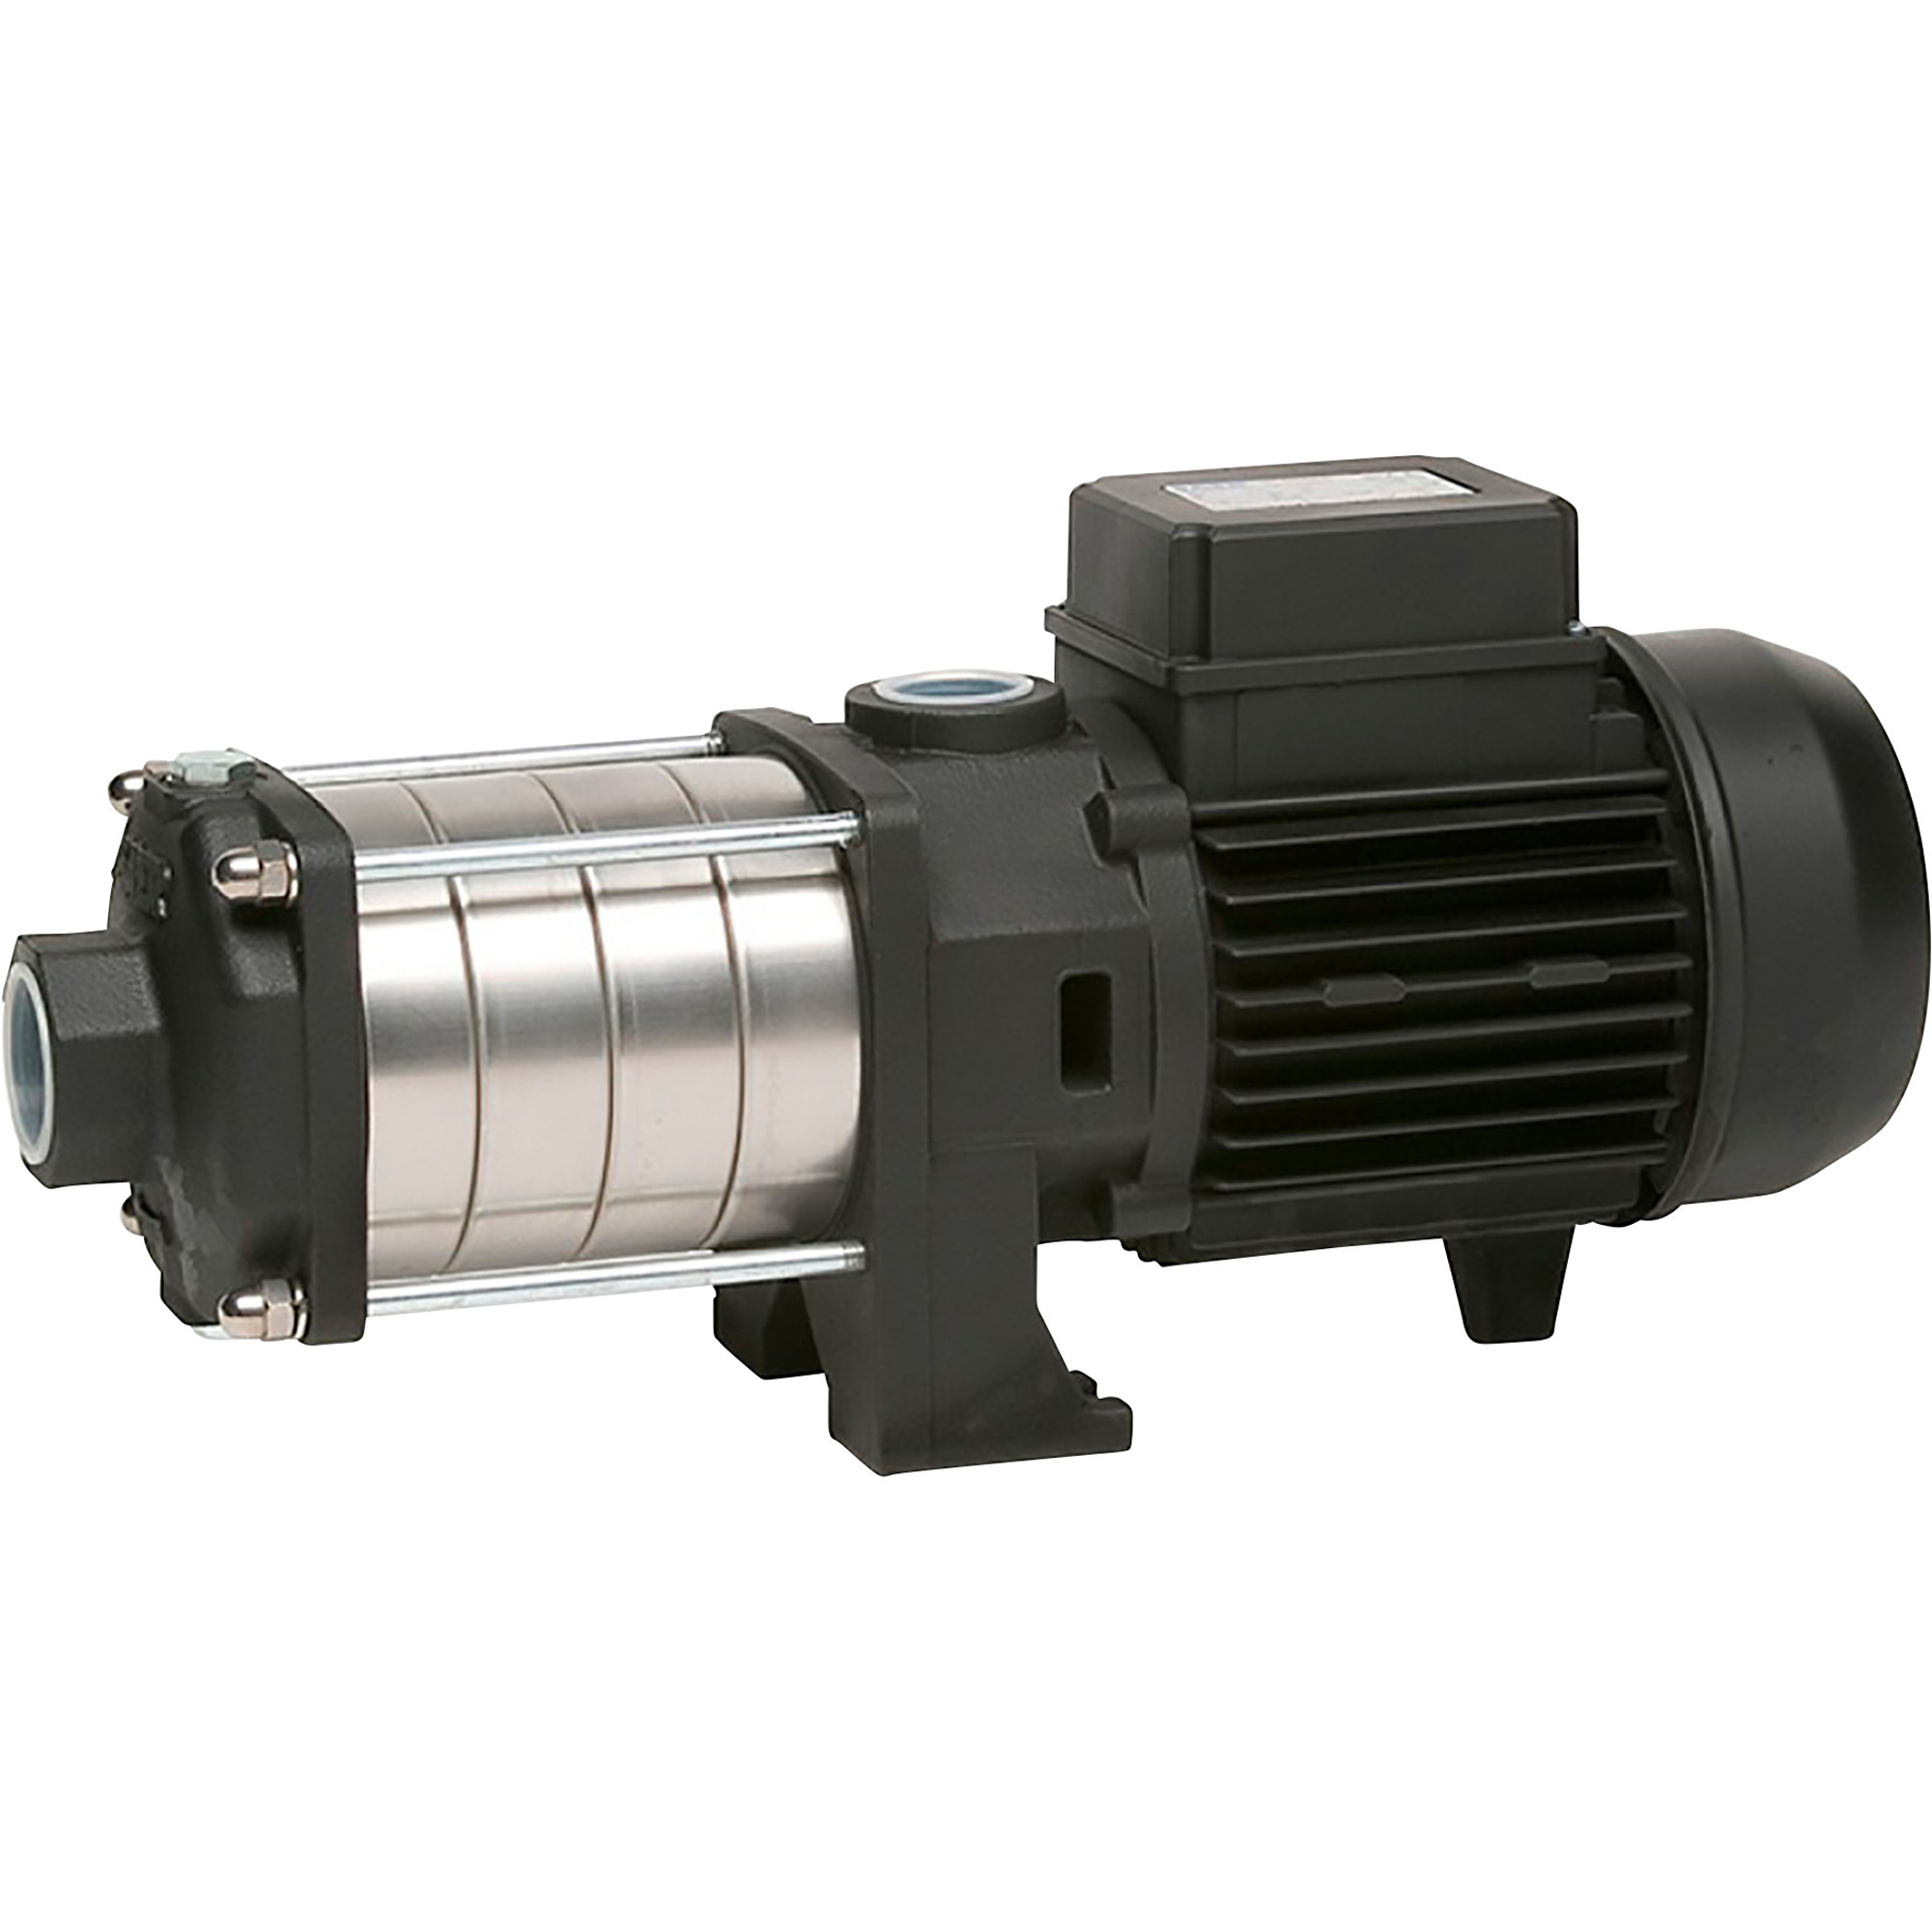 SAER-USA Multi-Stage Horizontal Water Pump, 4500 GPH, 2 HP, 220/380 Volts, 1 1/2Inch Ports, Model 6OP40/3